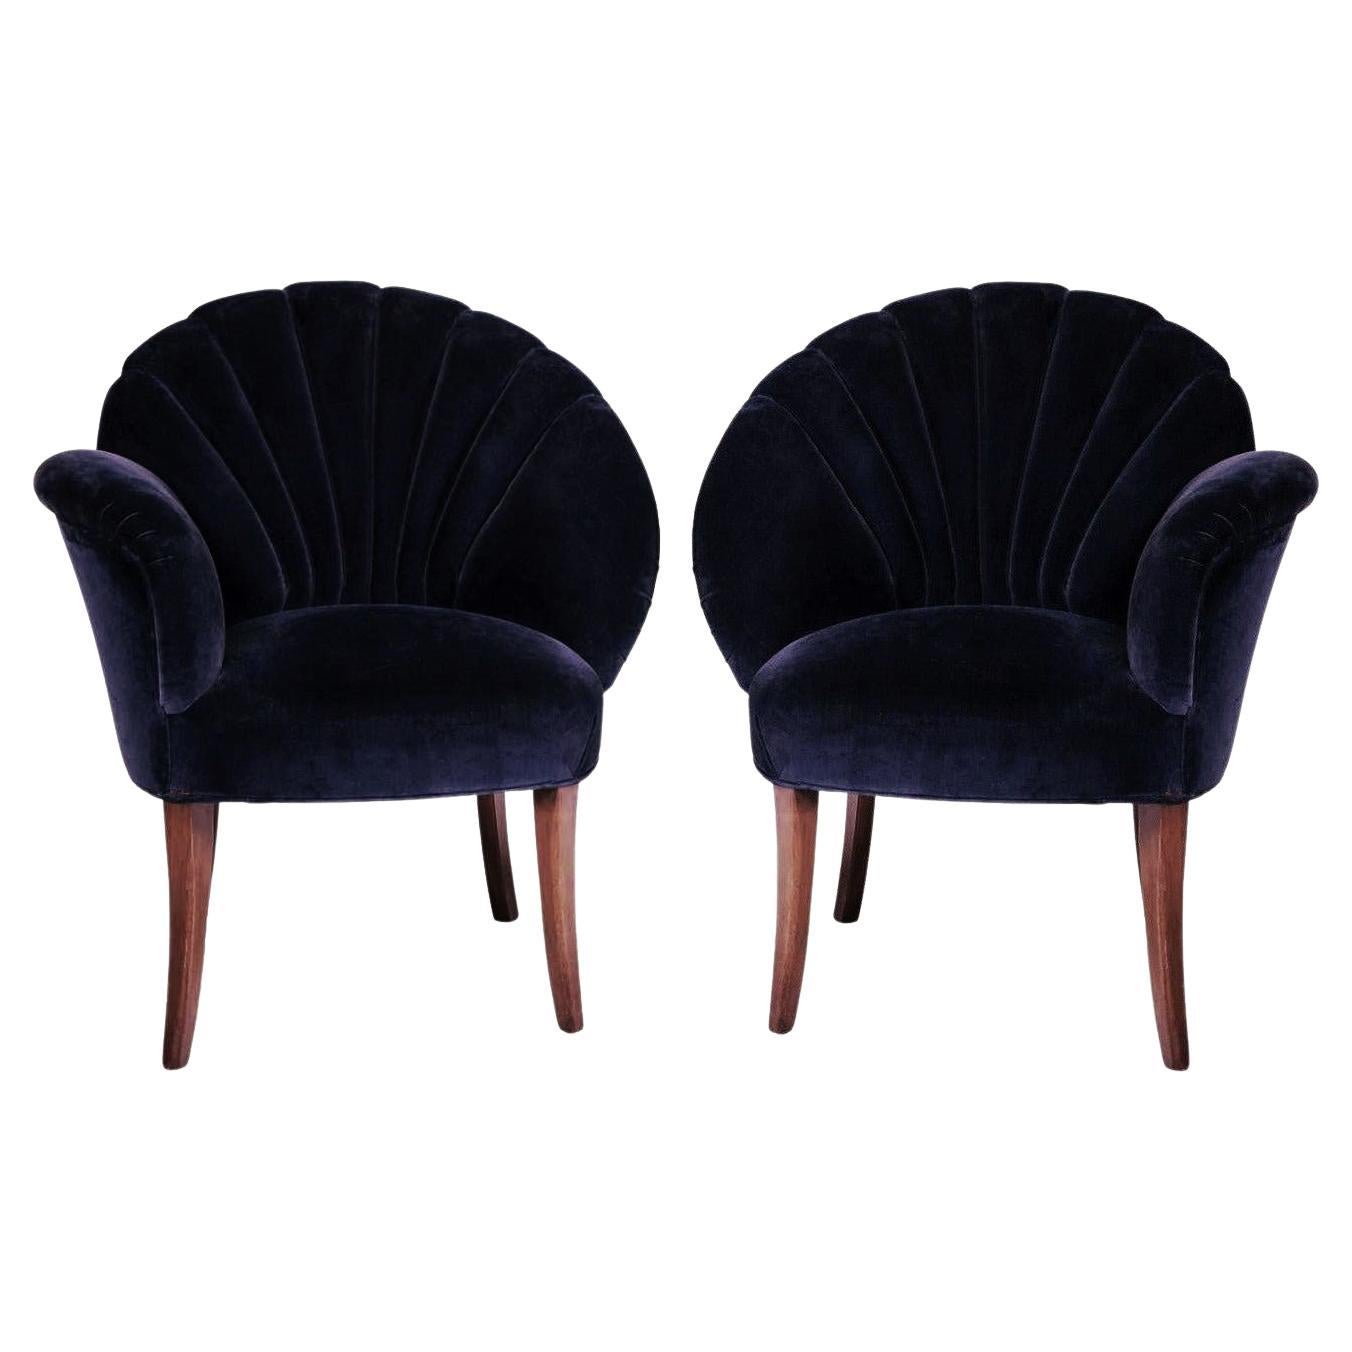 Pair of High Style Art Deco Fan Backed Side Chairs